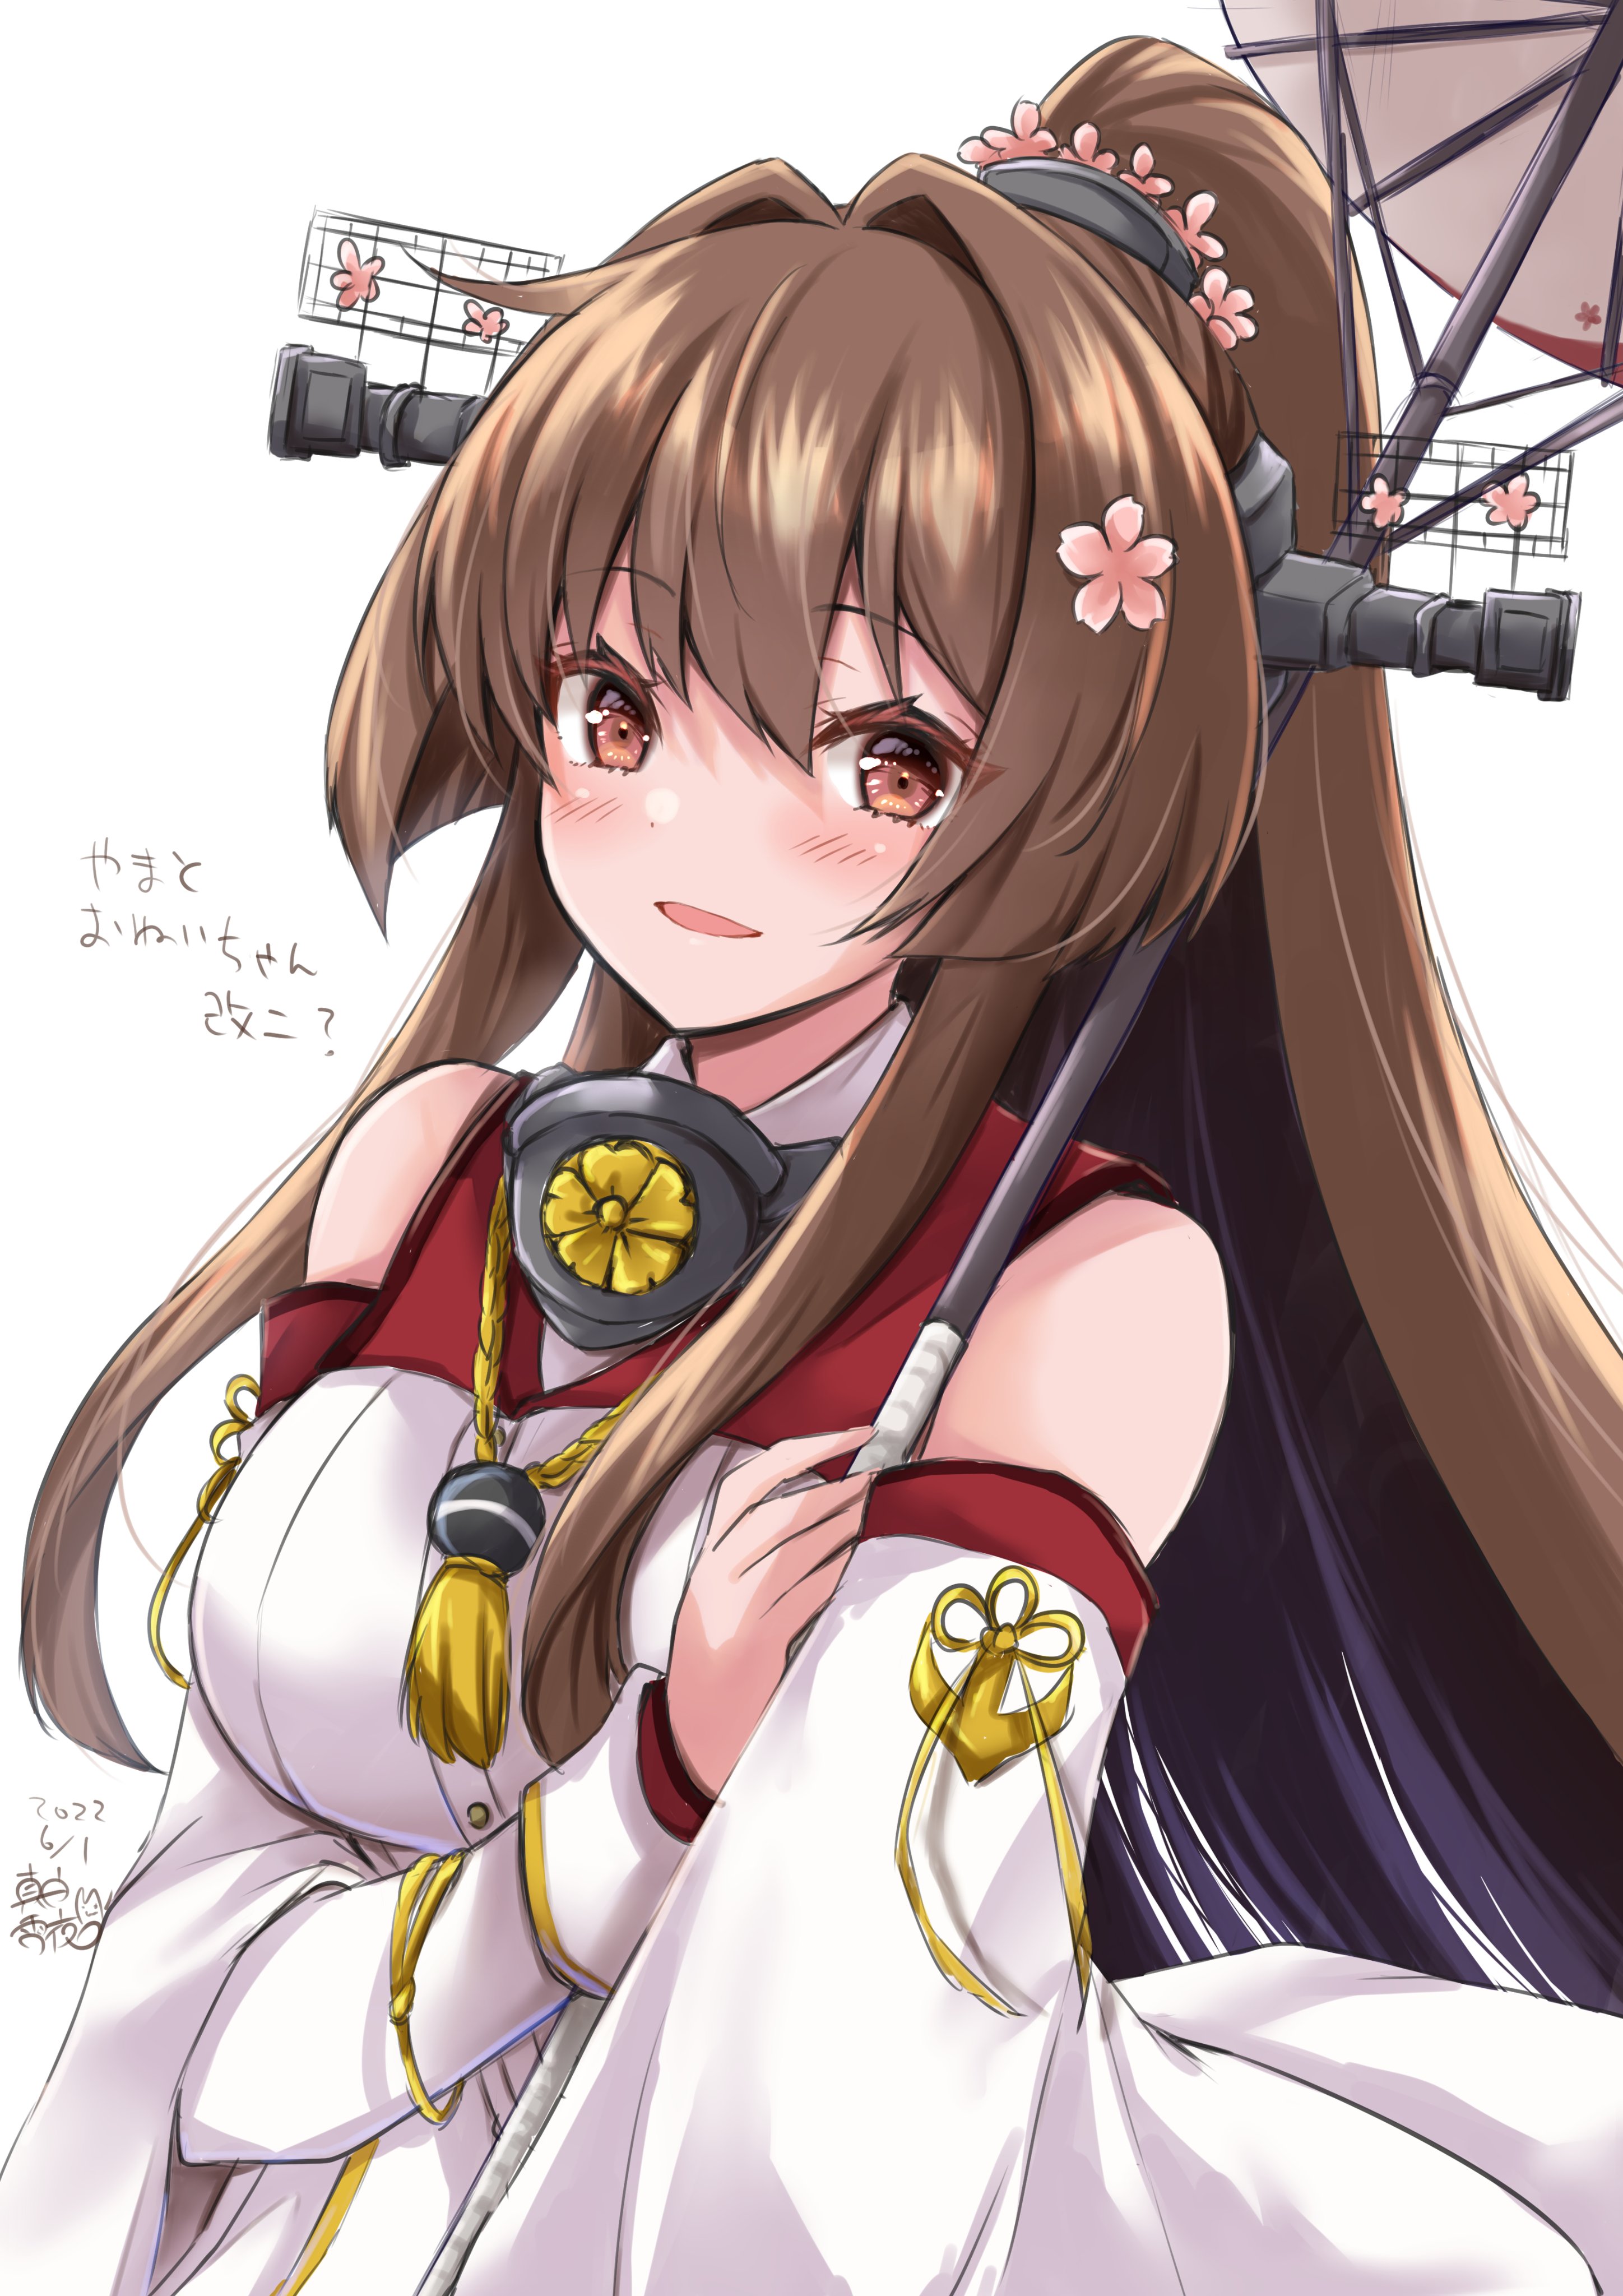 Will Fans Watch the New Kantai Collection Series? | J-List Blog